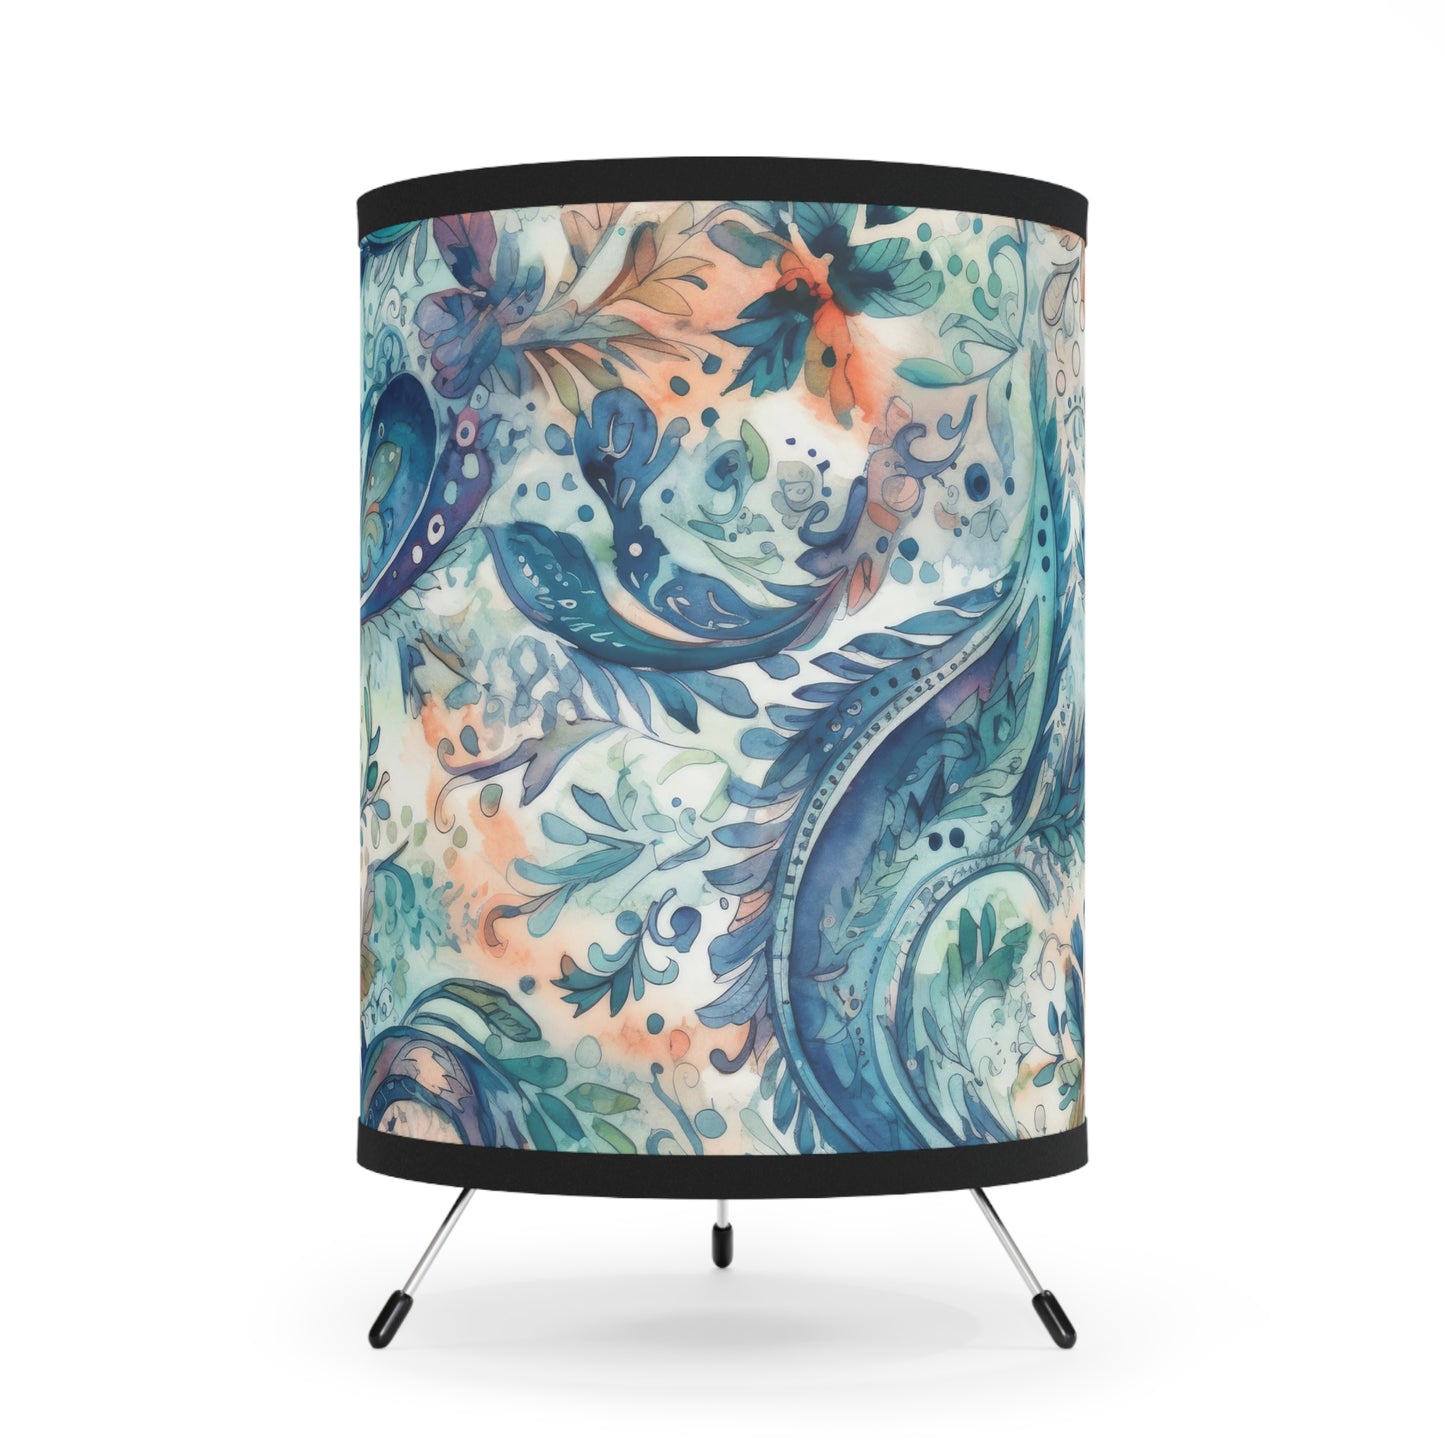 Beautiful and Unique - Watercolor Blue and Yelow Paisleys 1 - Tripod Lamp with High-Res Printed Shade, US\CA plug